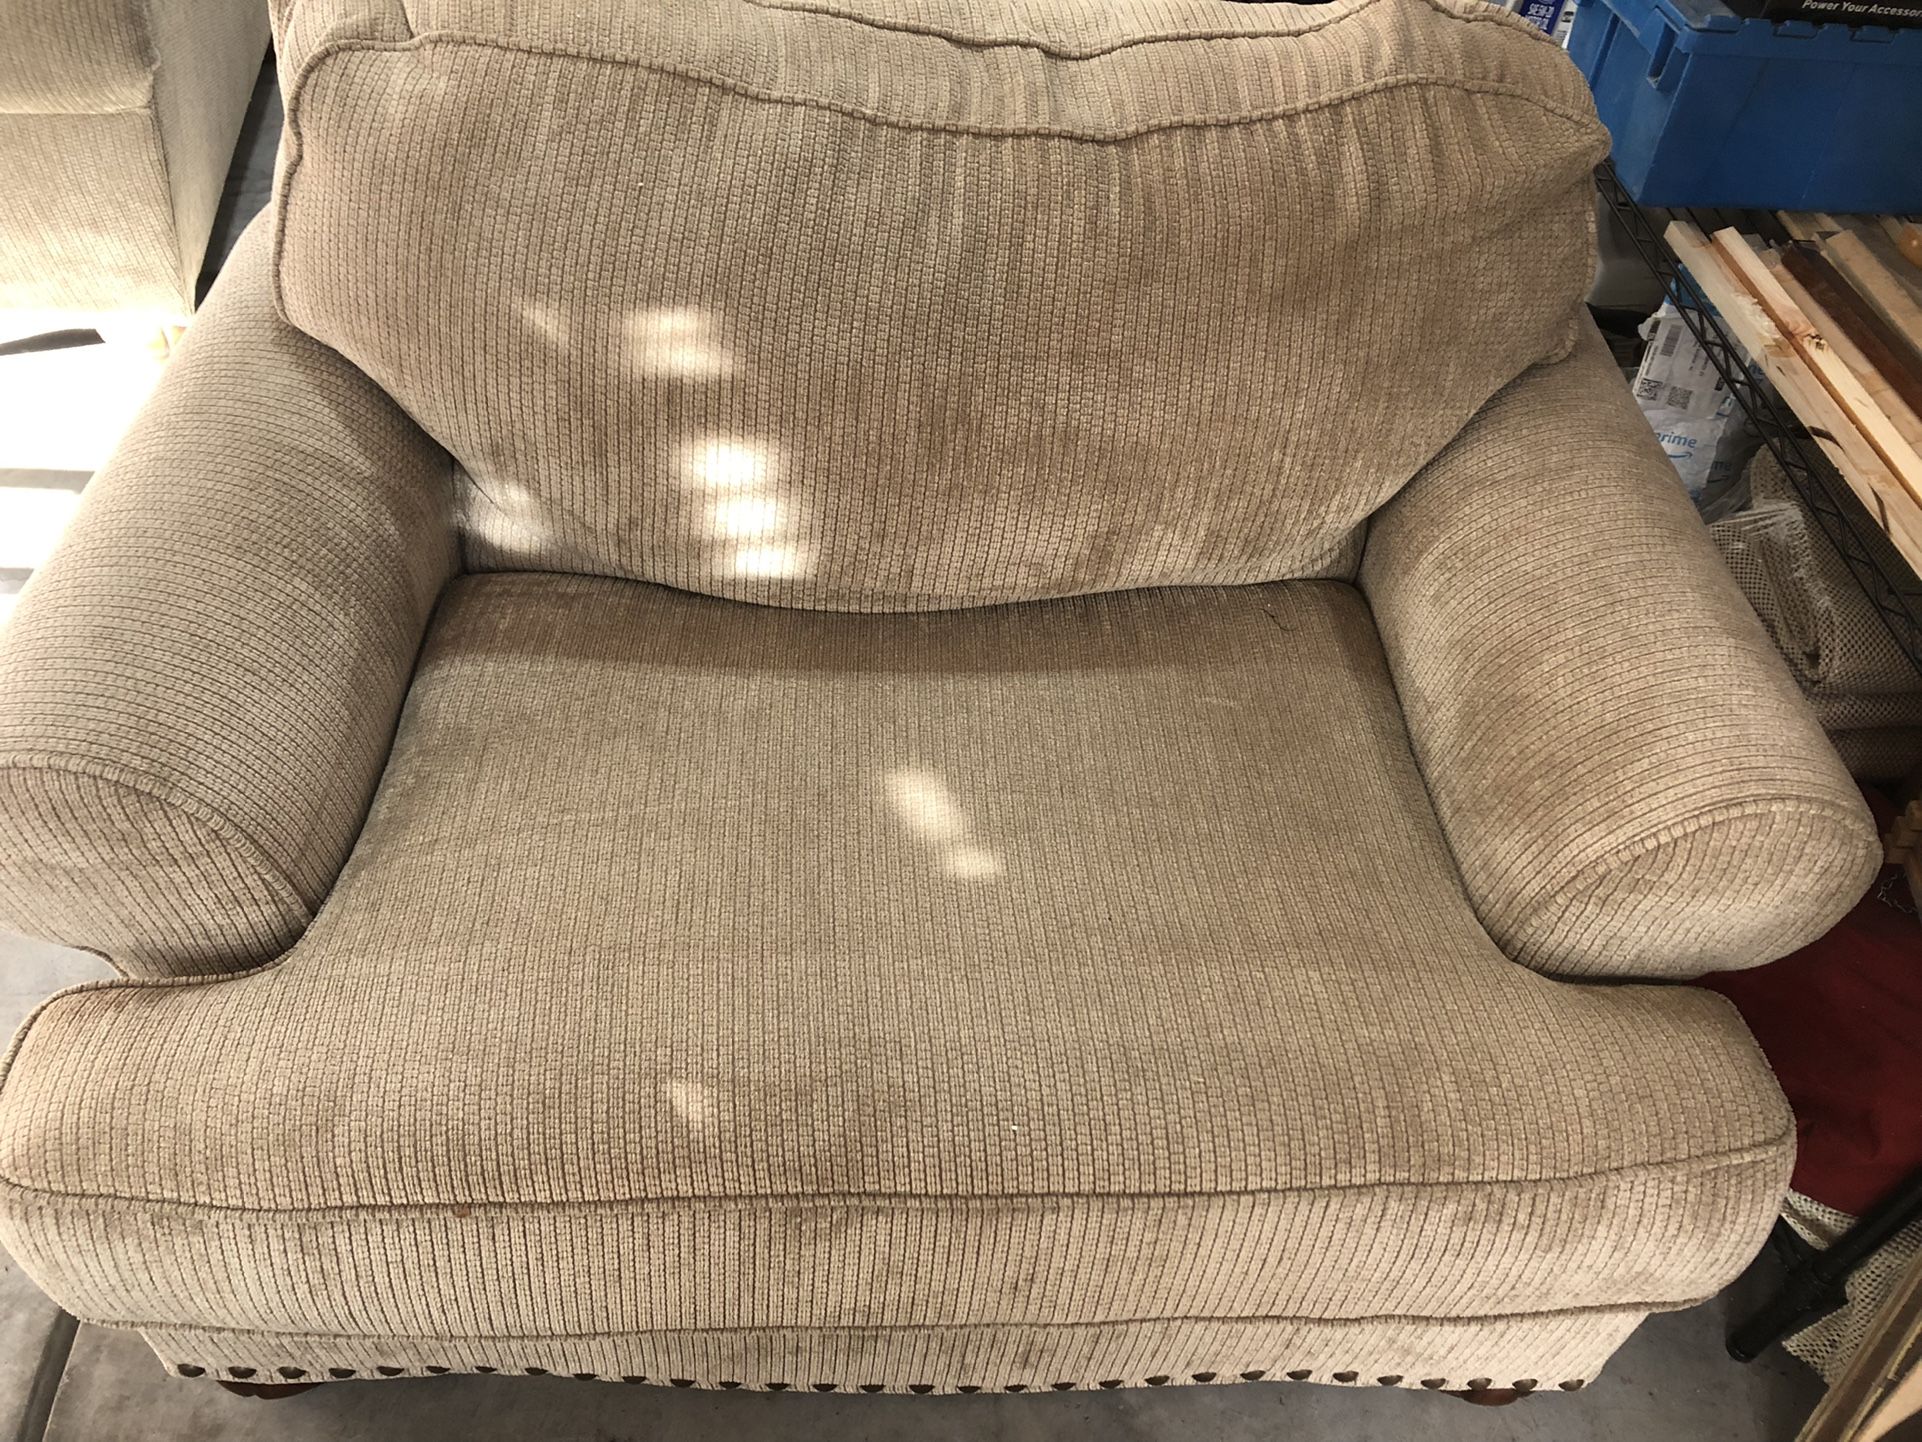 Ashley Oversized Chairs $75.00 Each